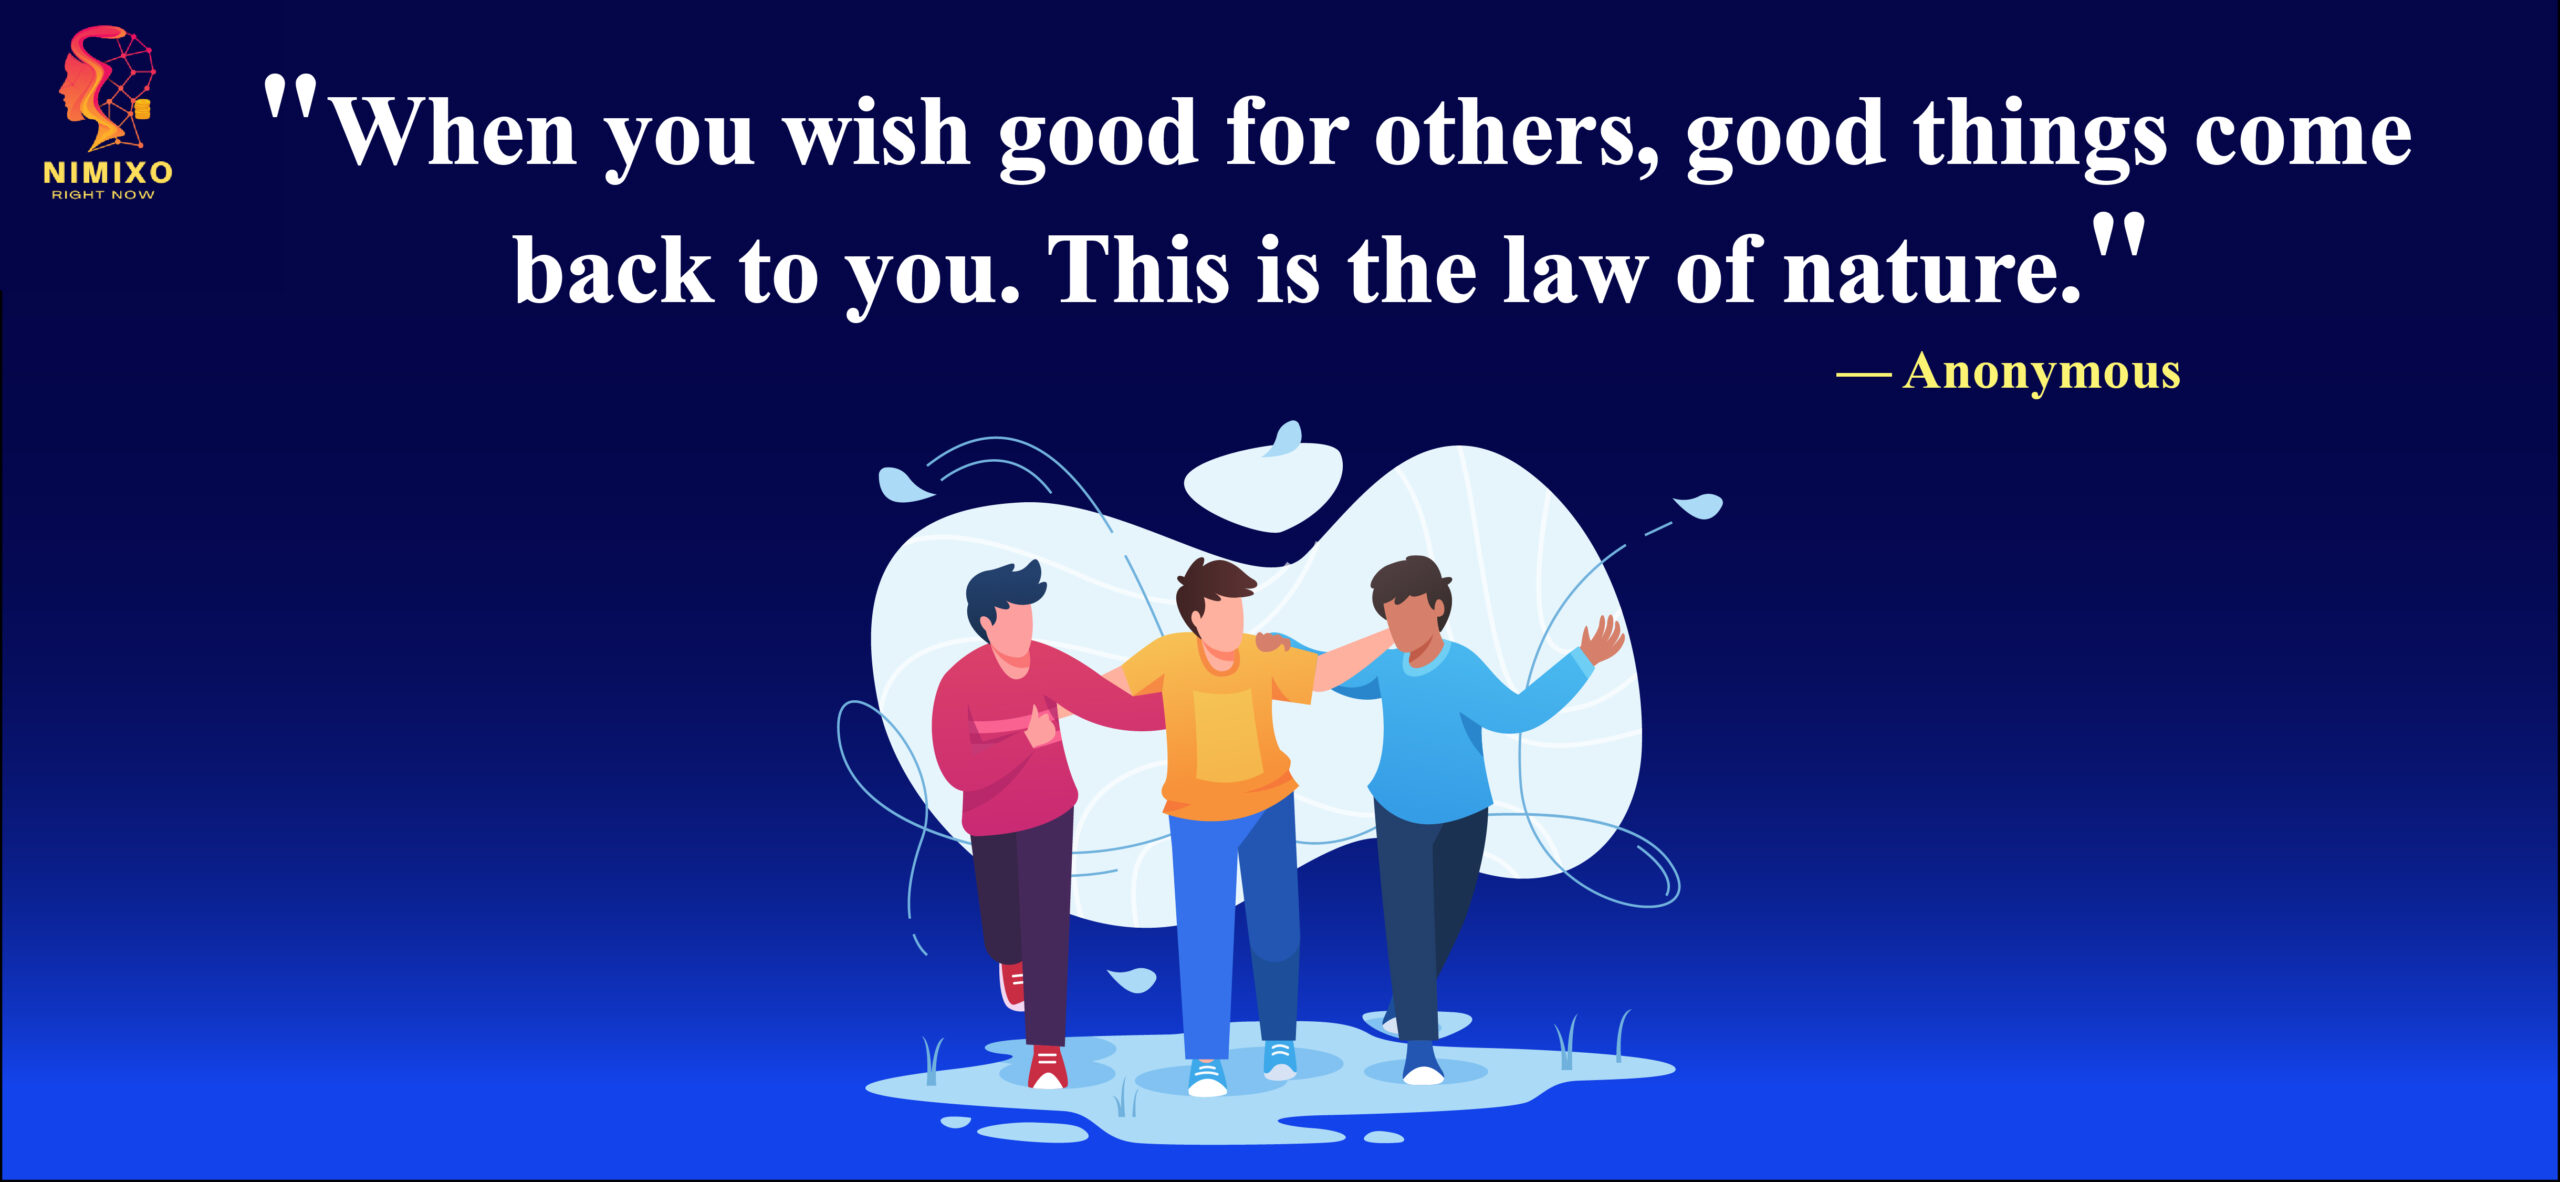 When you wish good for others, good things come back to you. This is the law of nature.